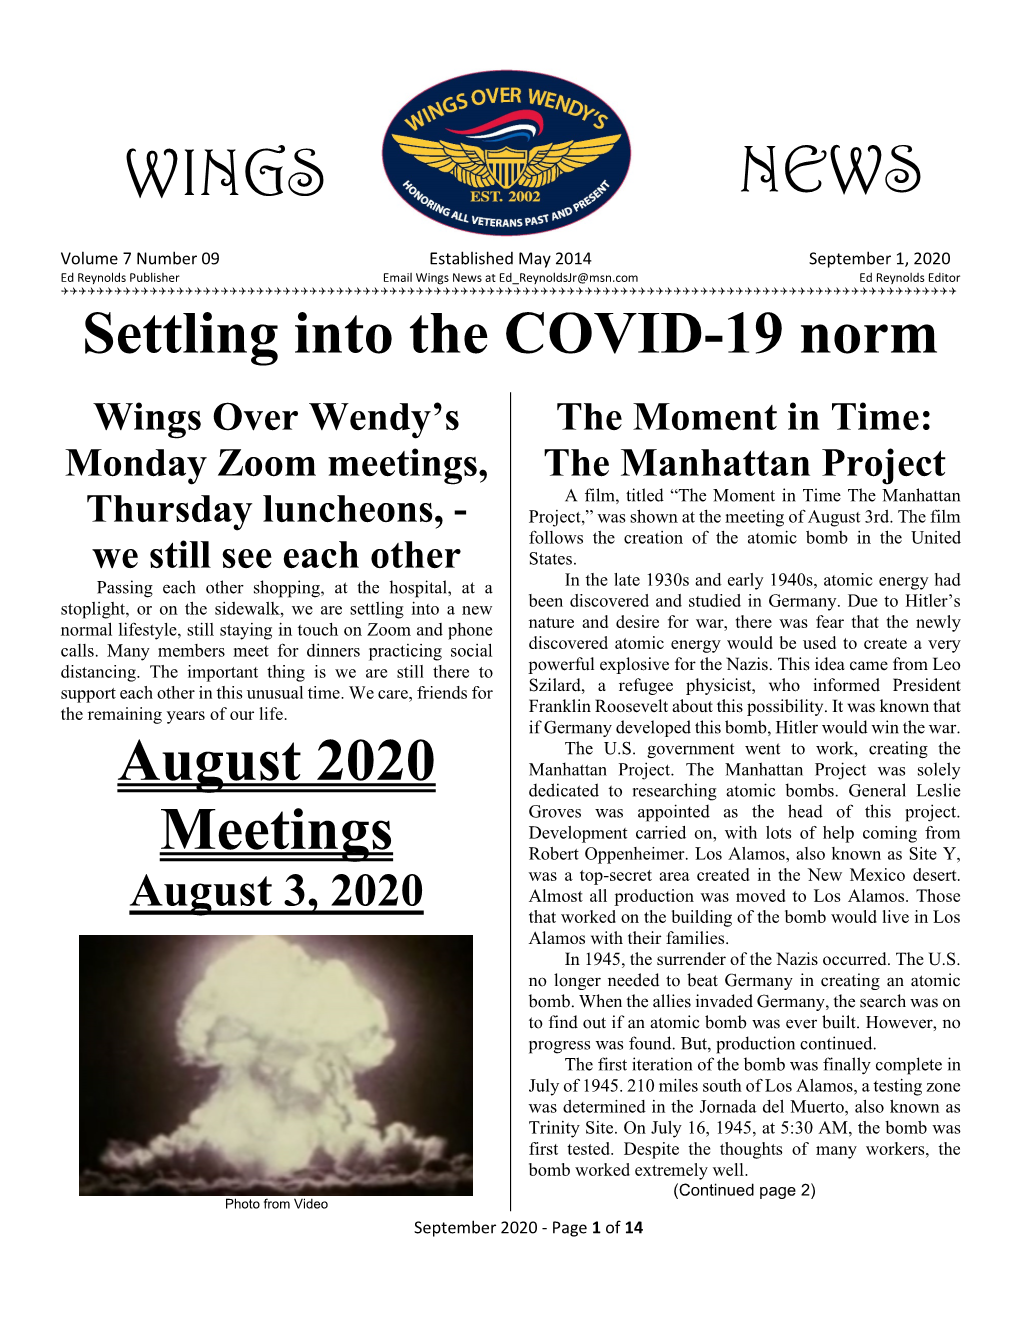 Zoom Meetings, the Manhattan Project a Film, Titled “The Moment in Time the Manhattan Thursday Luncheons, - Project,” Was Shown at the Meeting of August 3Rd